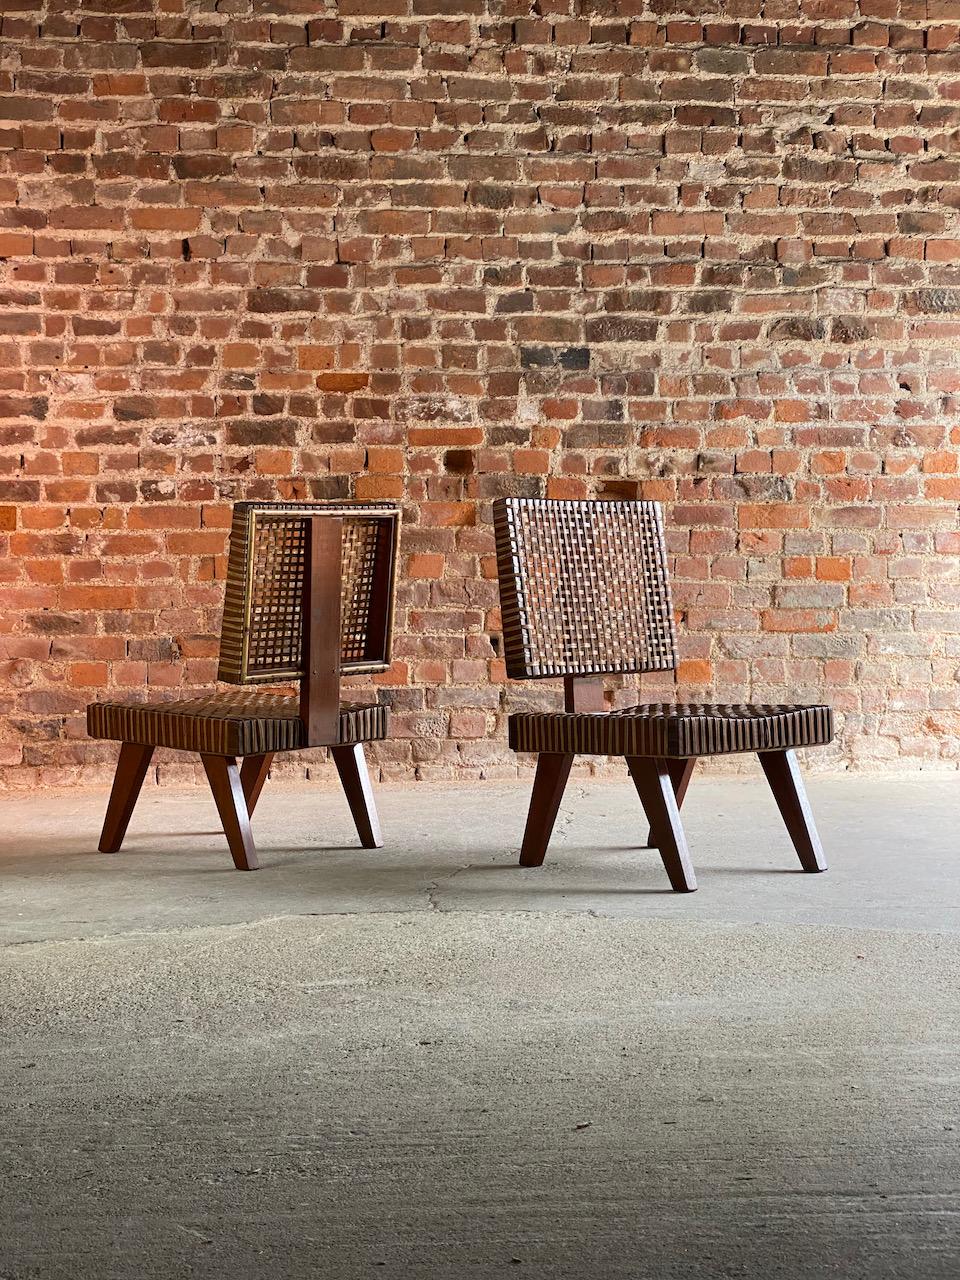 Indian Pierre Jeanneret Rare Lounge Chairs Chandigarh Circa 1955-56 For Sale